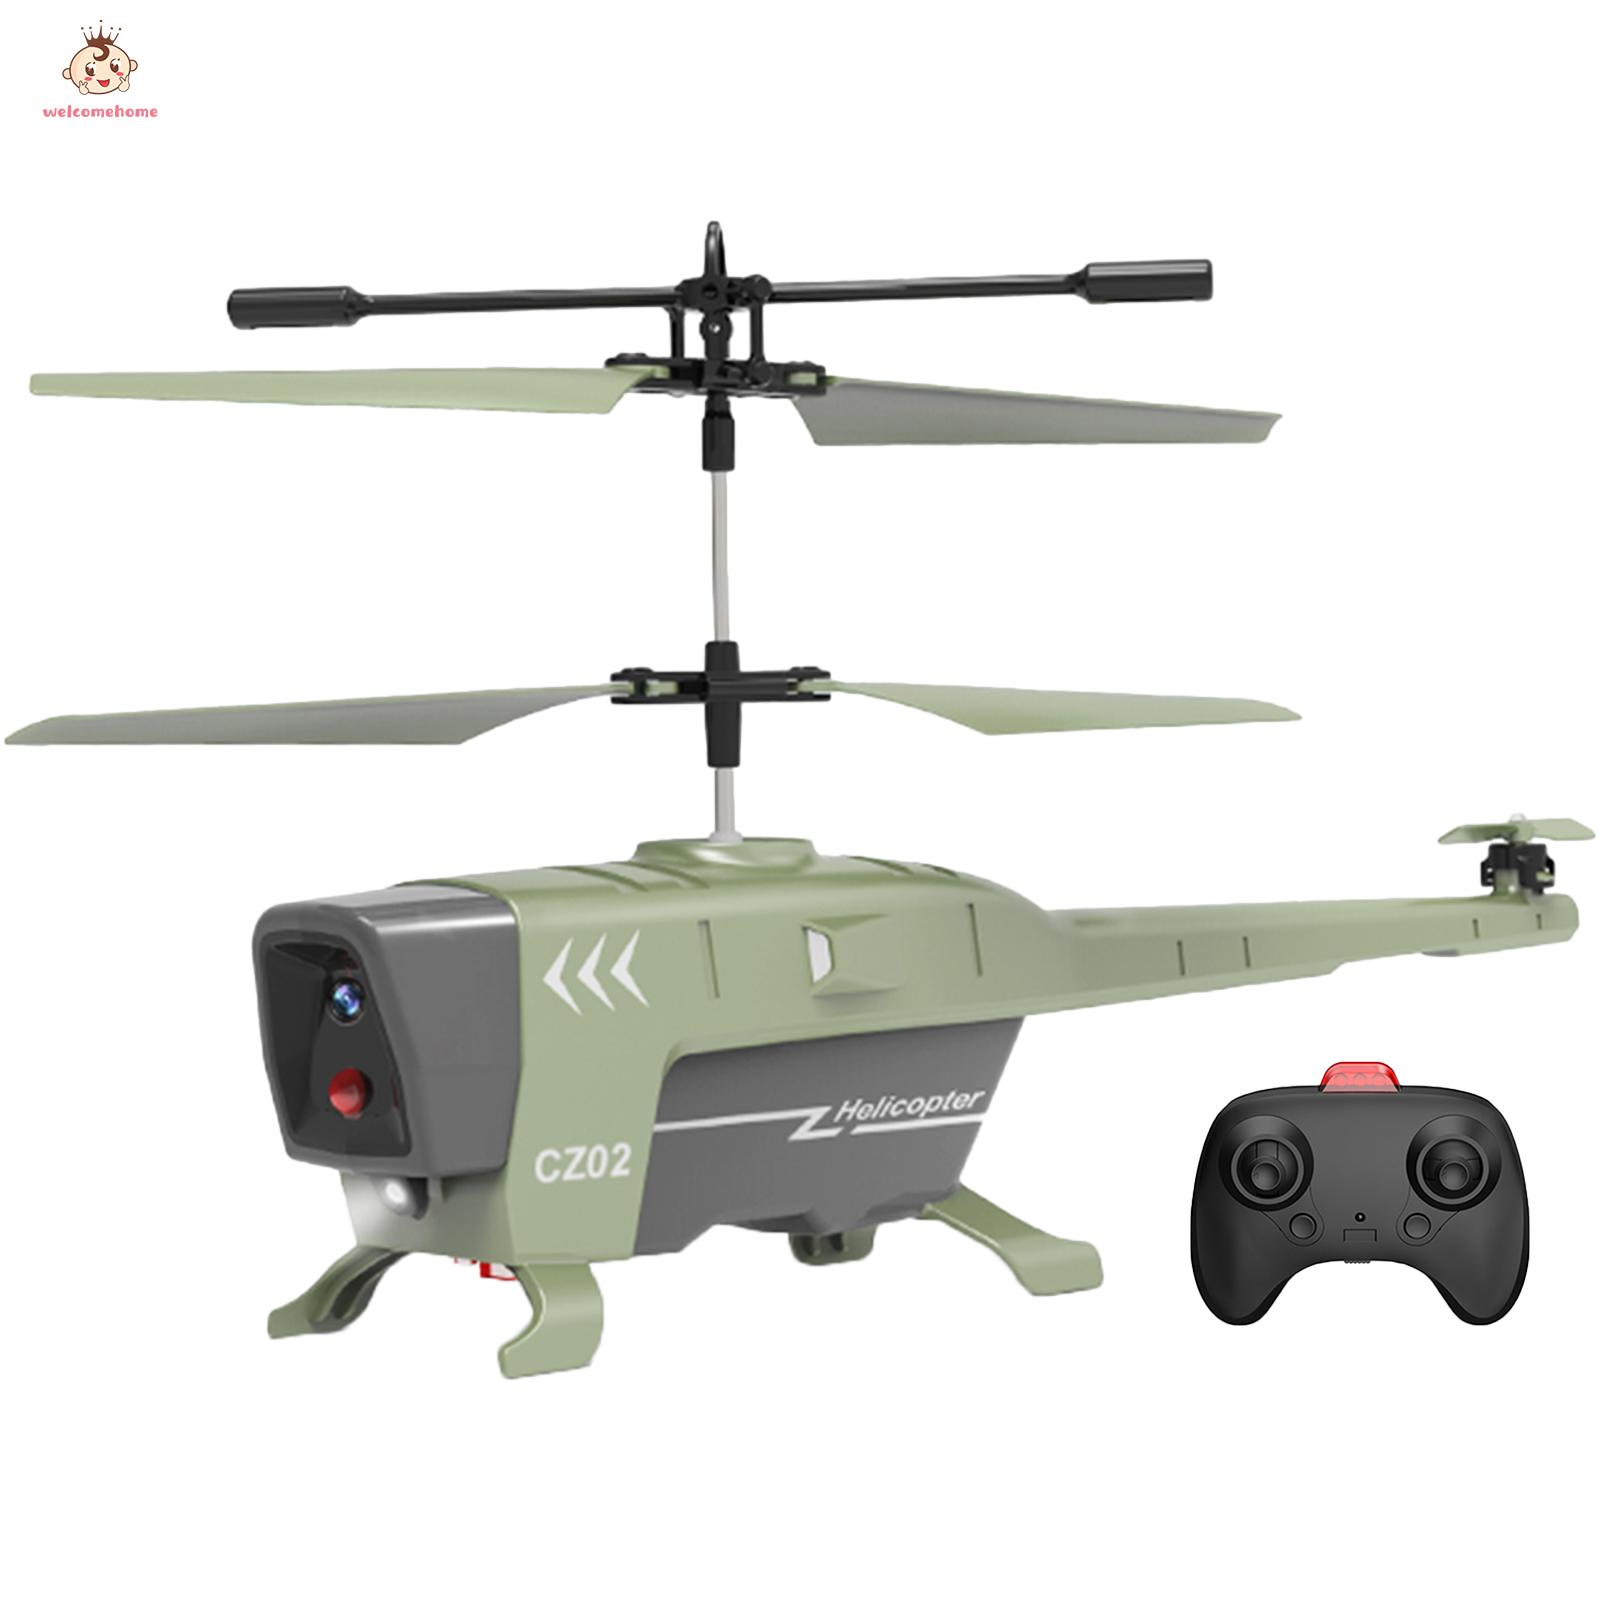 2.4GHz RC Helicopter Aircraft with Gyroscope 2.5 3.5CH Remote Control